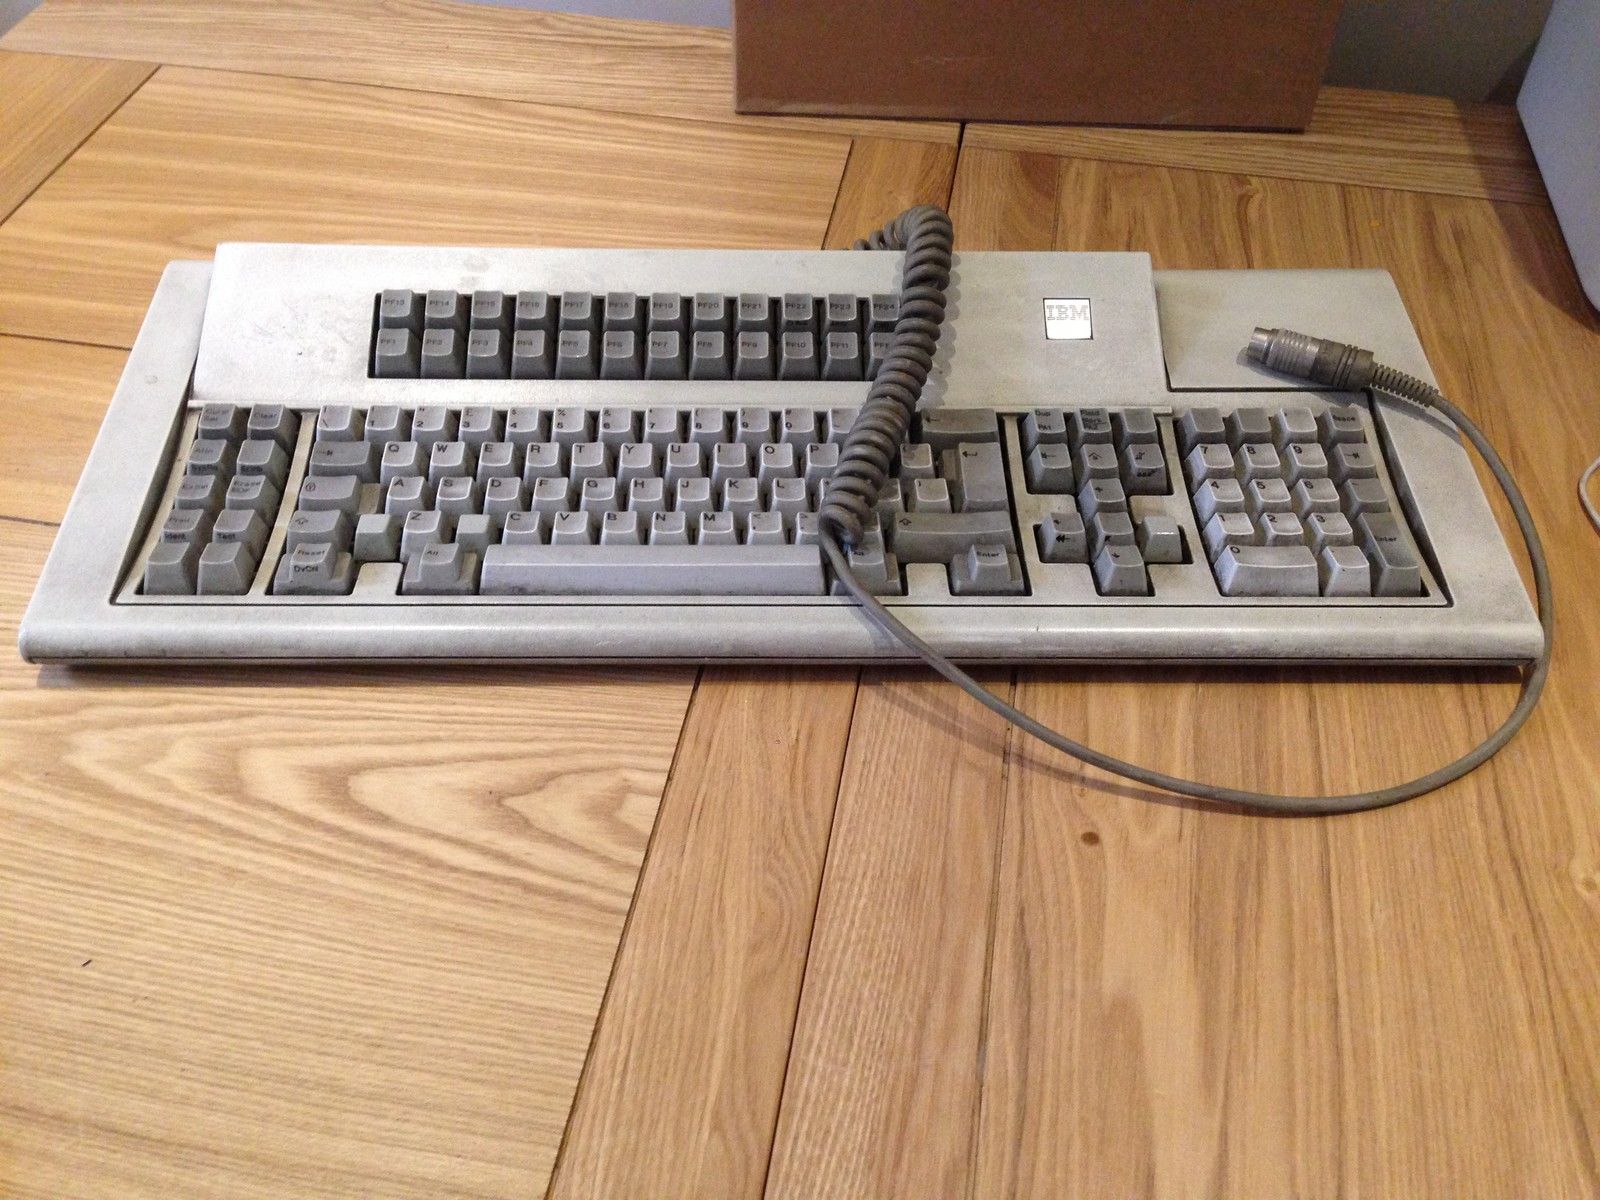 View of keyboard with side view of connector